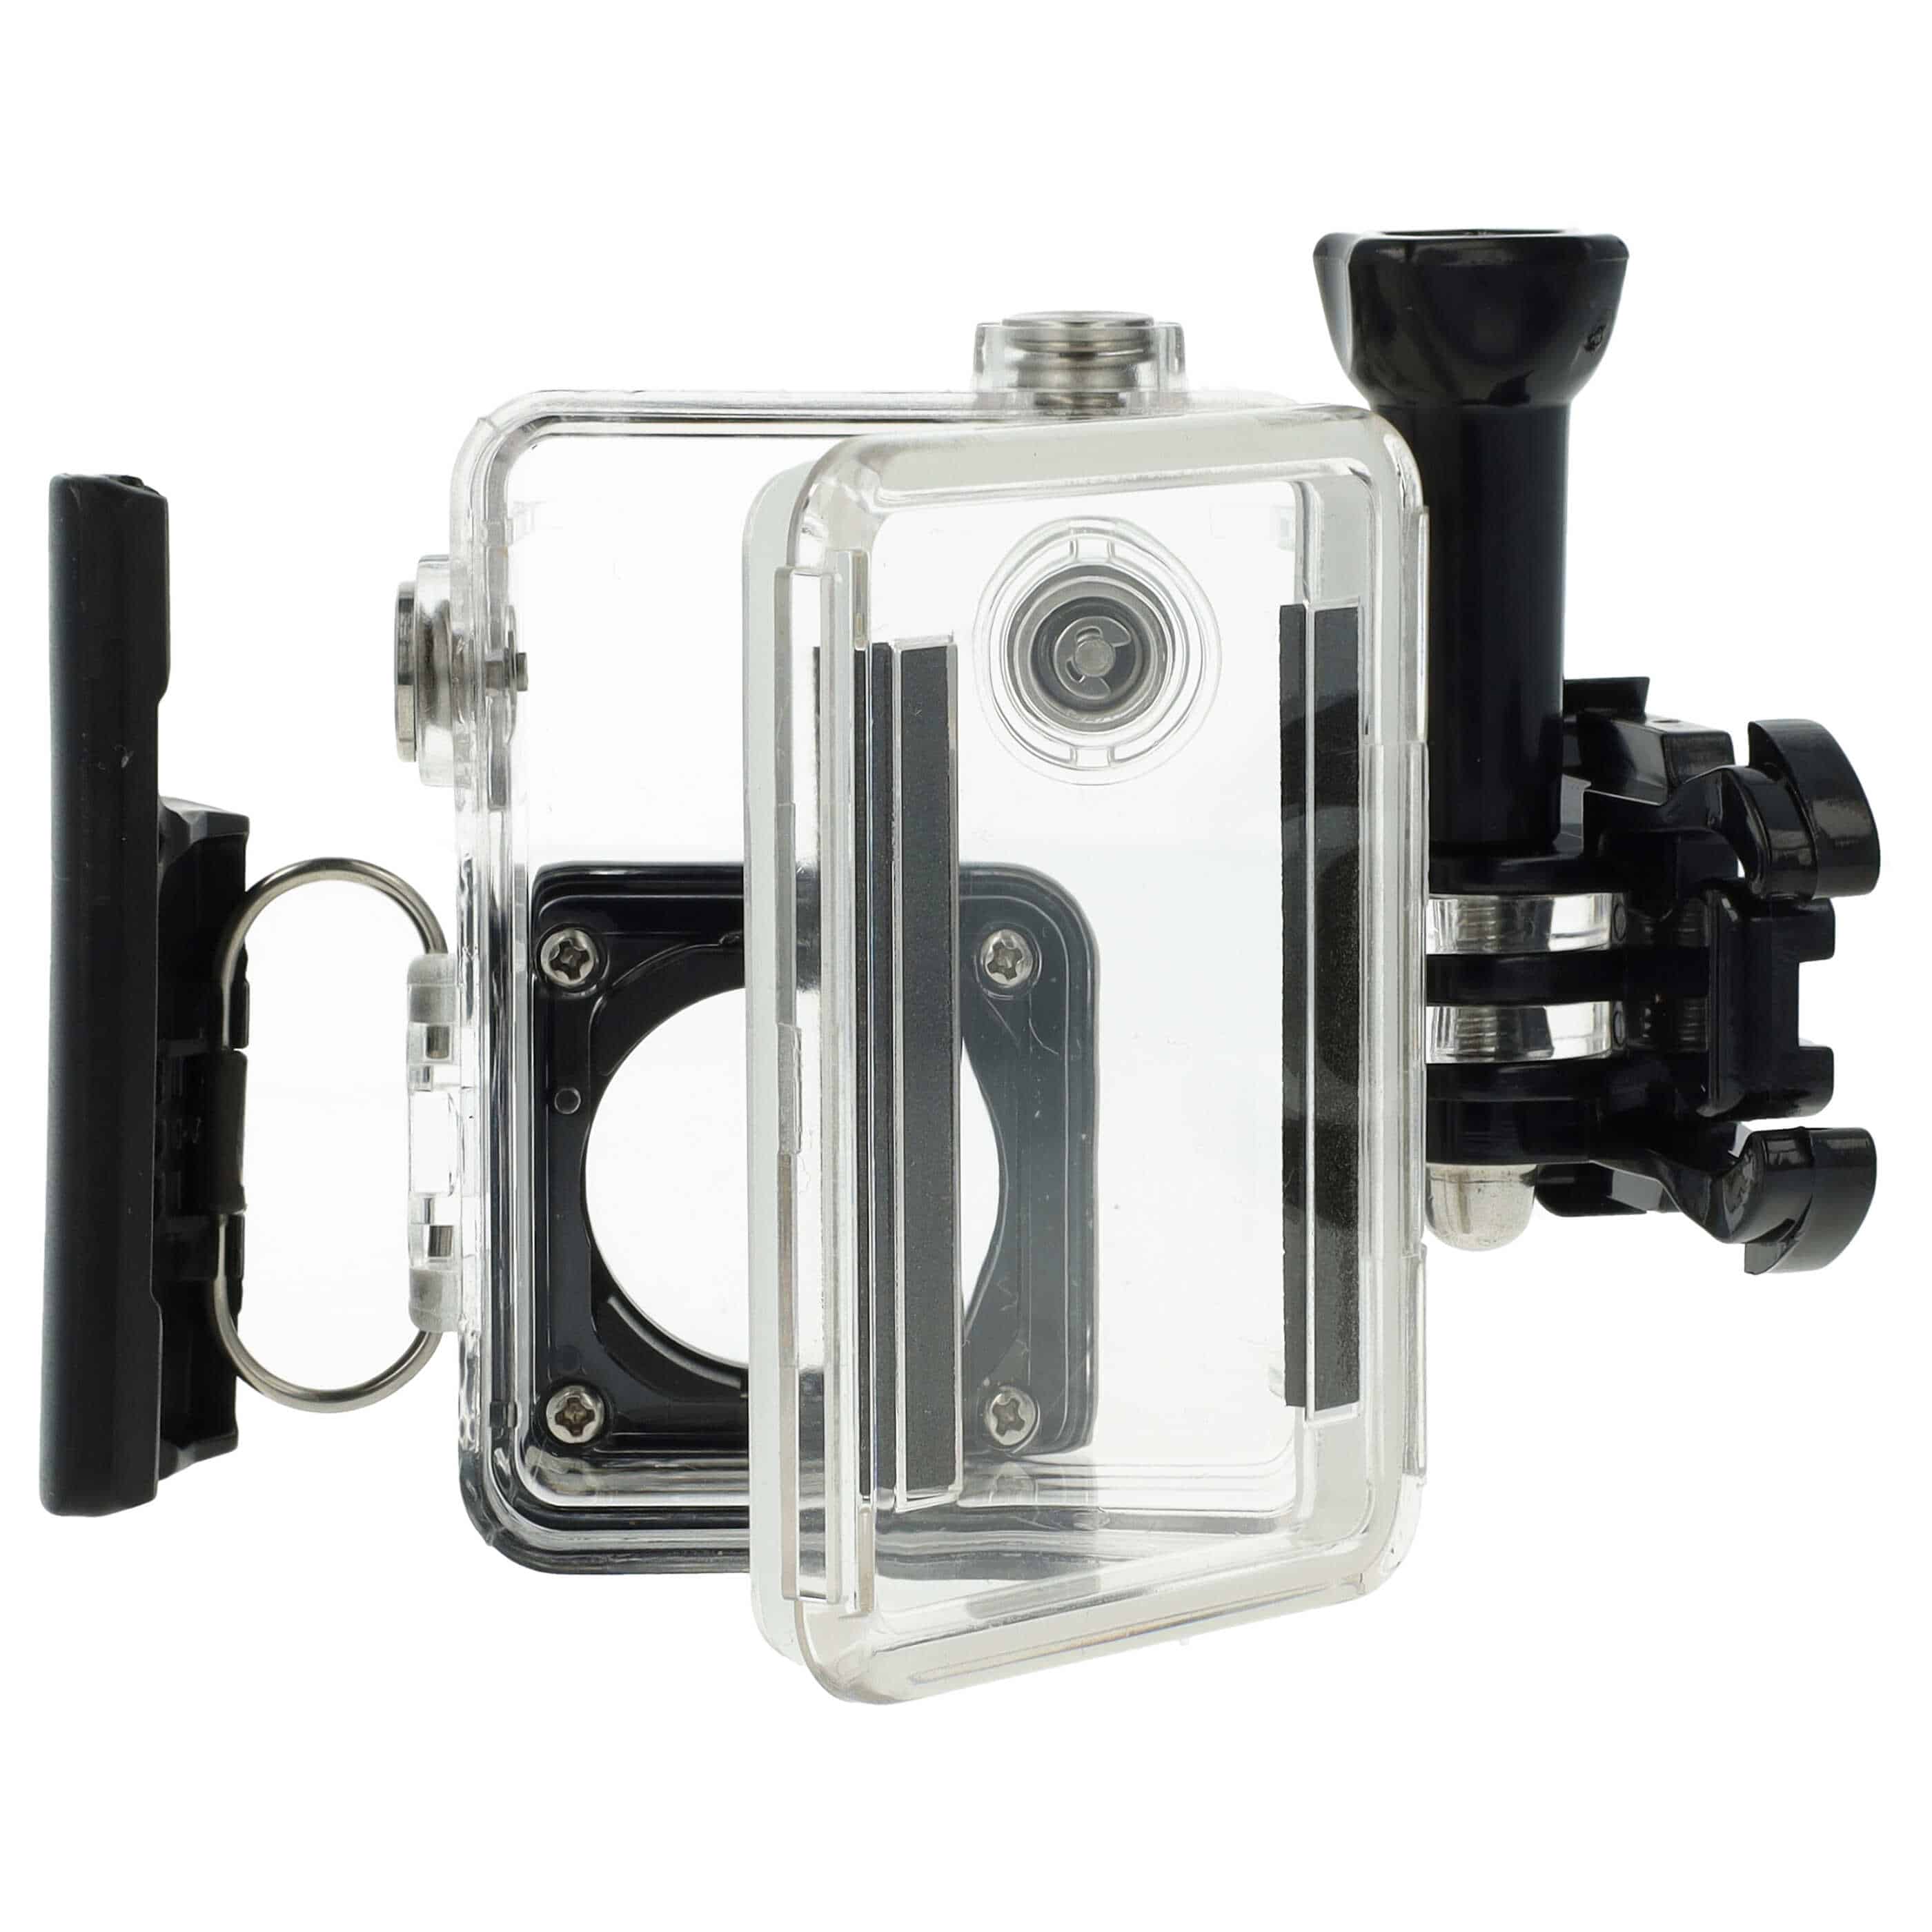 Underwater Housing suitable for GoPro Hero 3, 3+, 4 Action Camera - Up to a max. Depth of 45 m